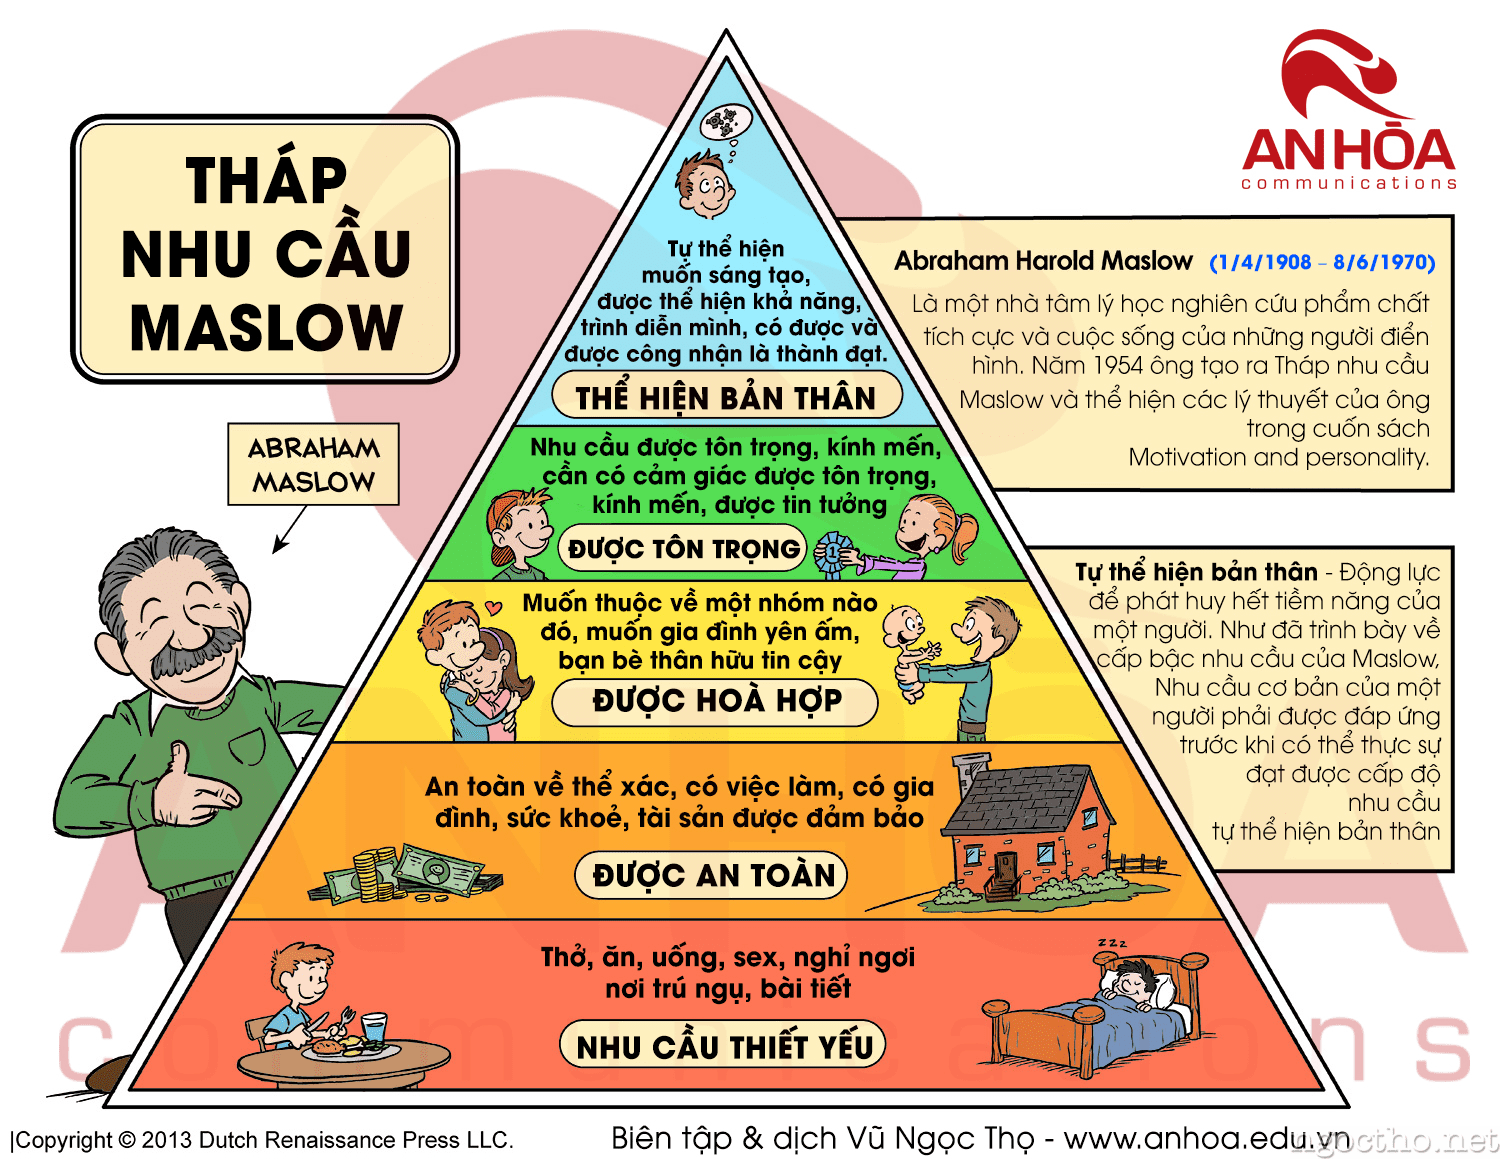 Tháp nhu cầu Maslow (Maslow’s Hierarchy of Needs)